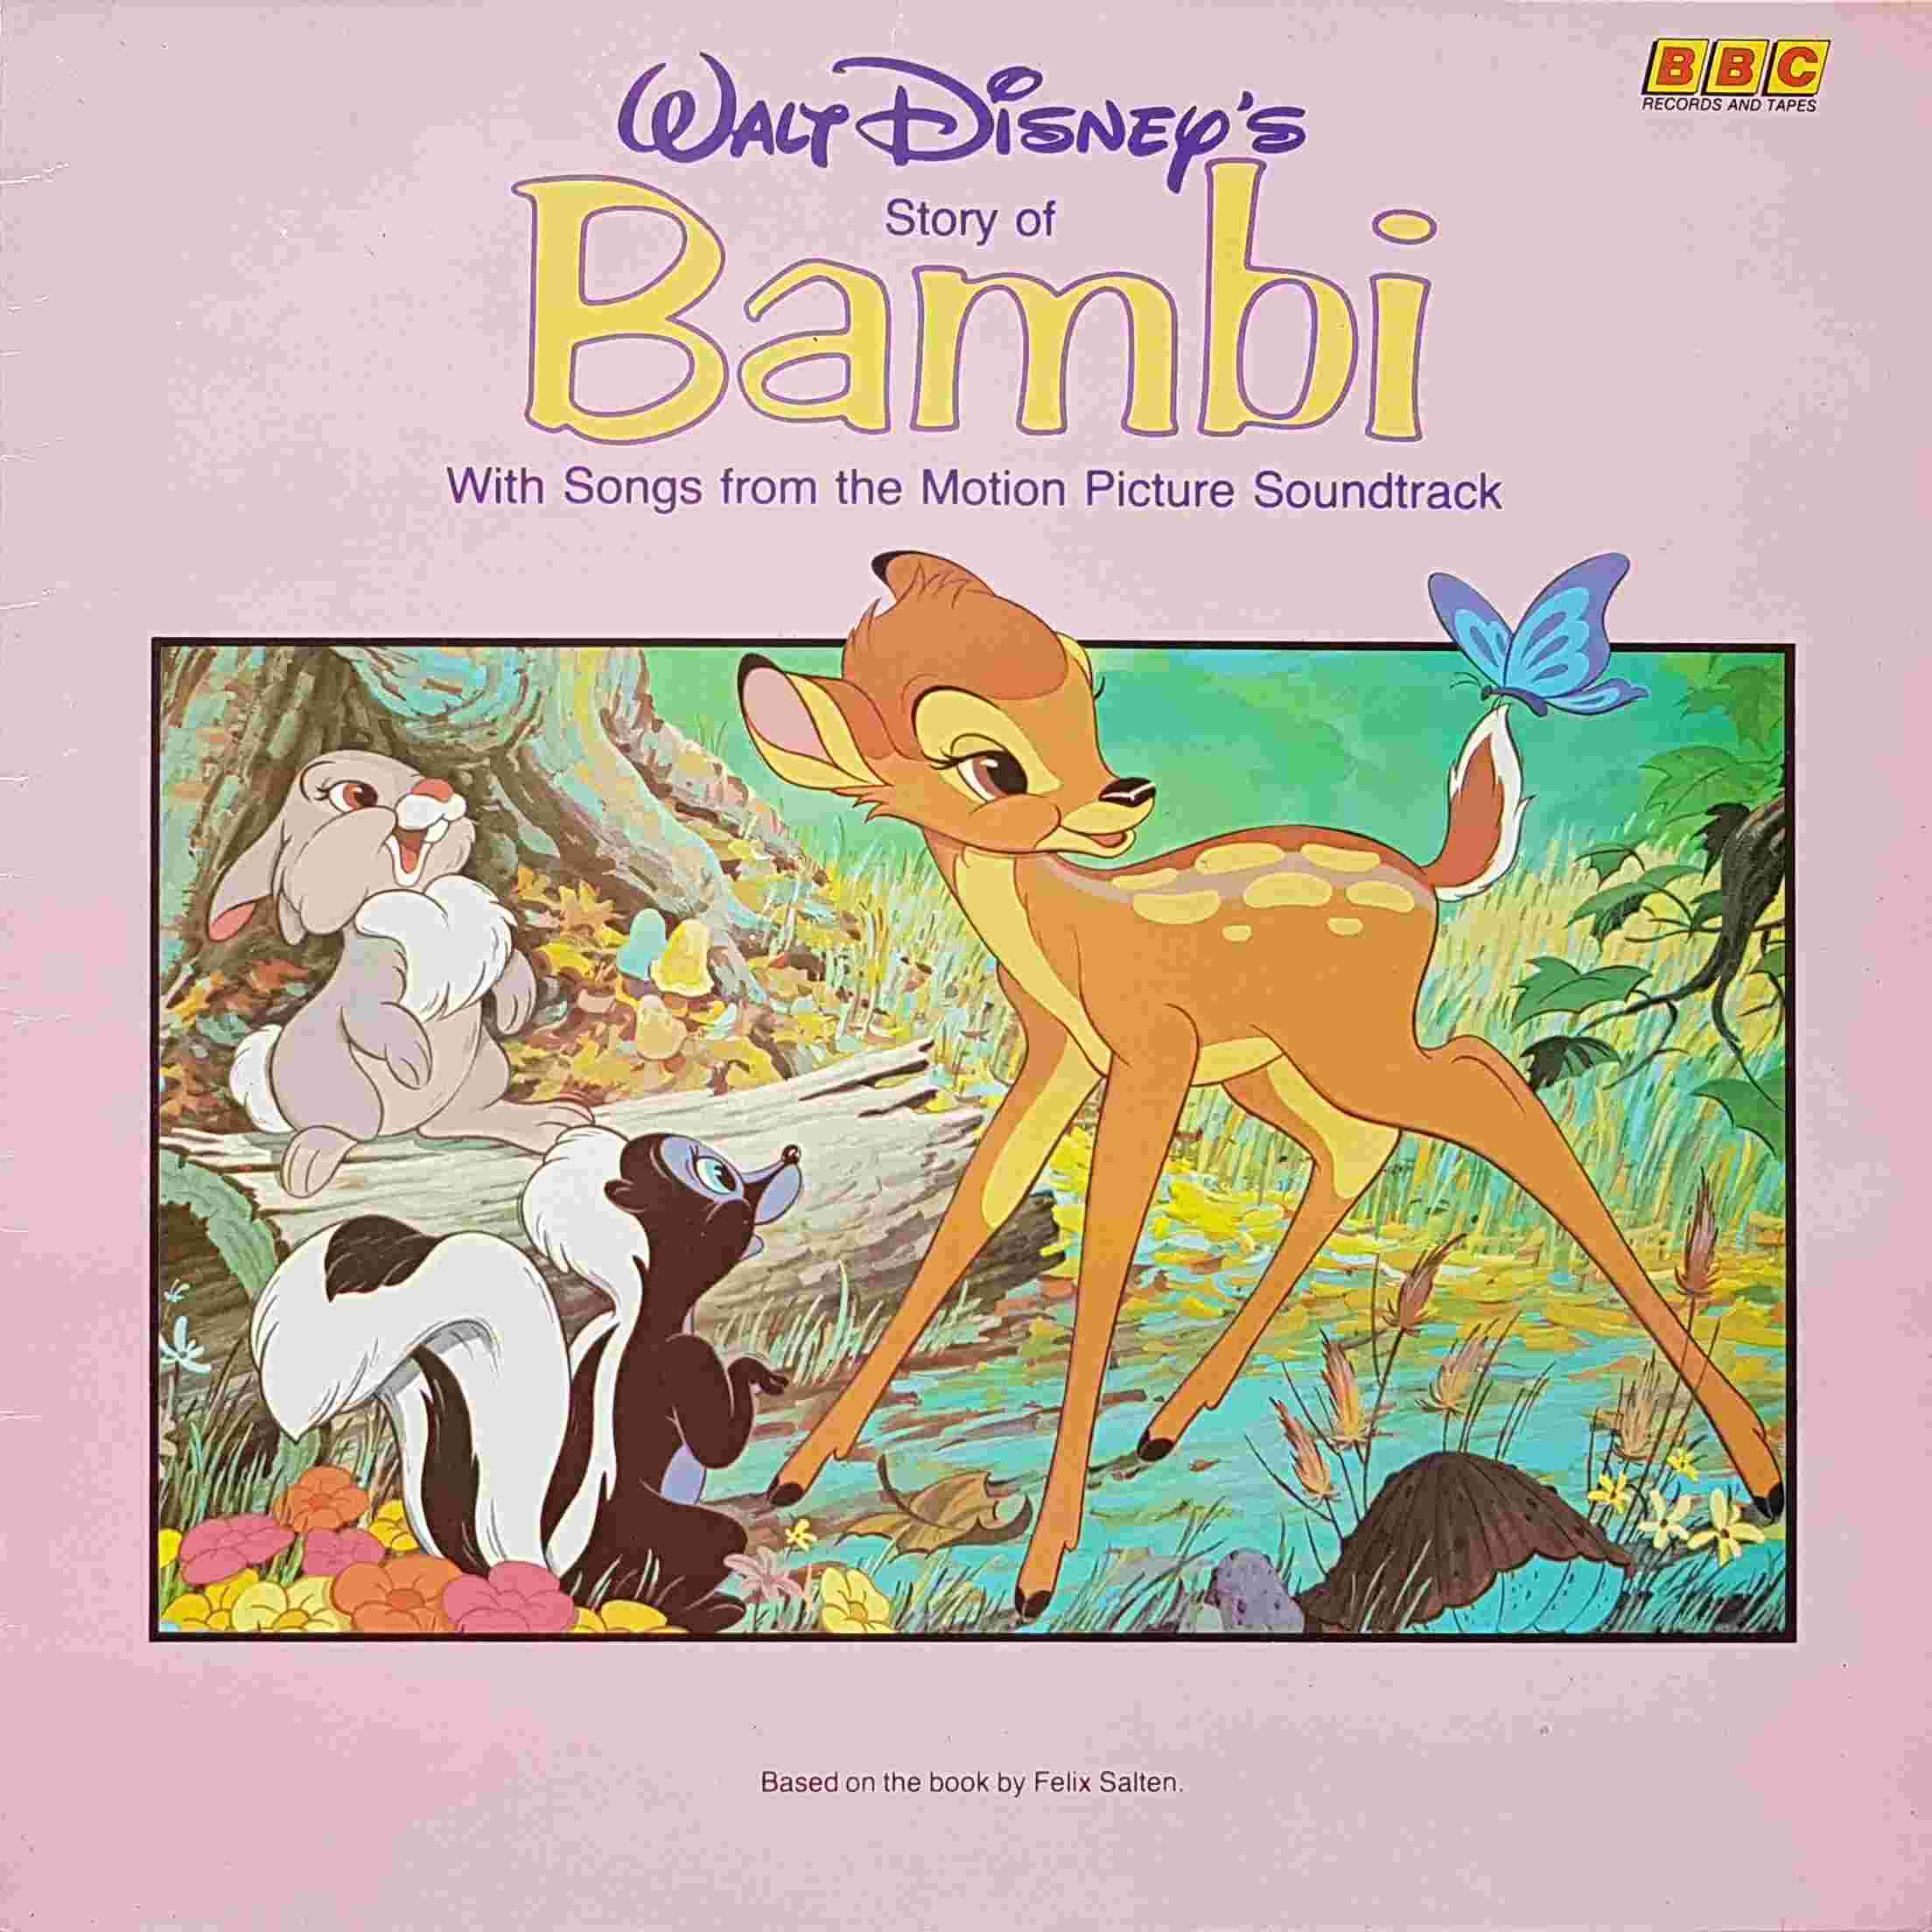 Picture of REC 541 Bambi by artist Morey / Churchill from the BBC albums - Records and Tapes library